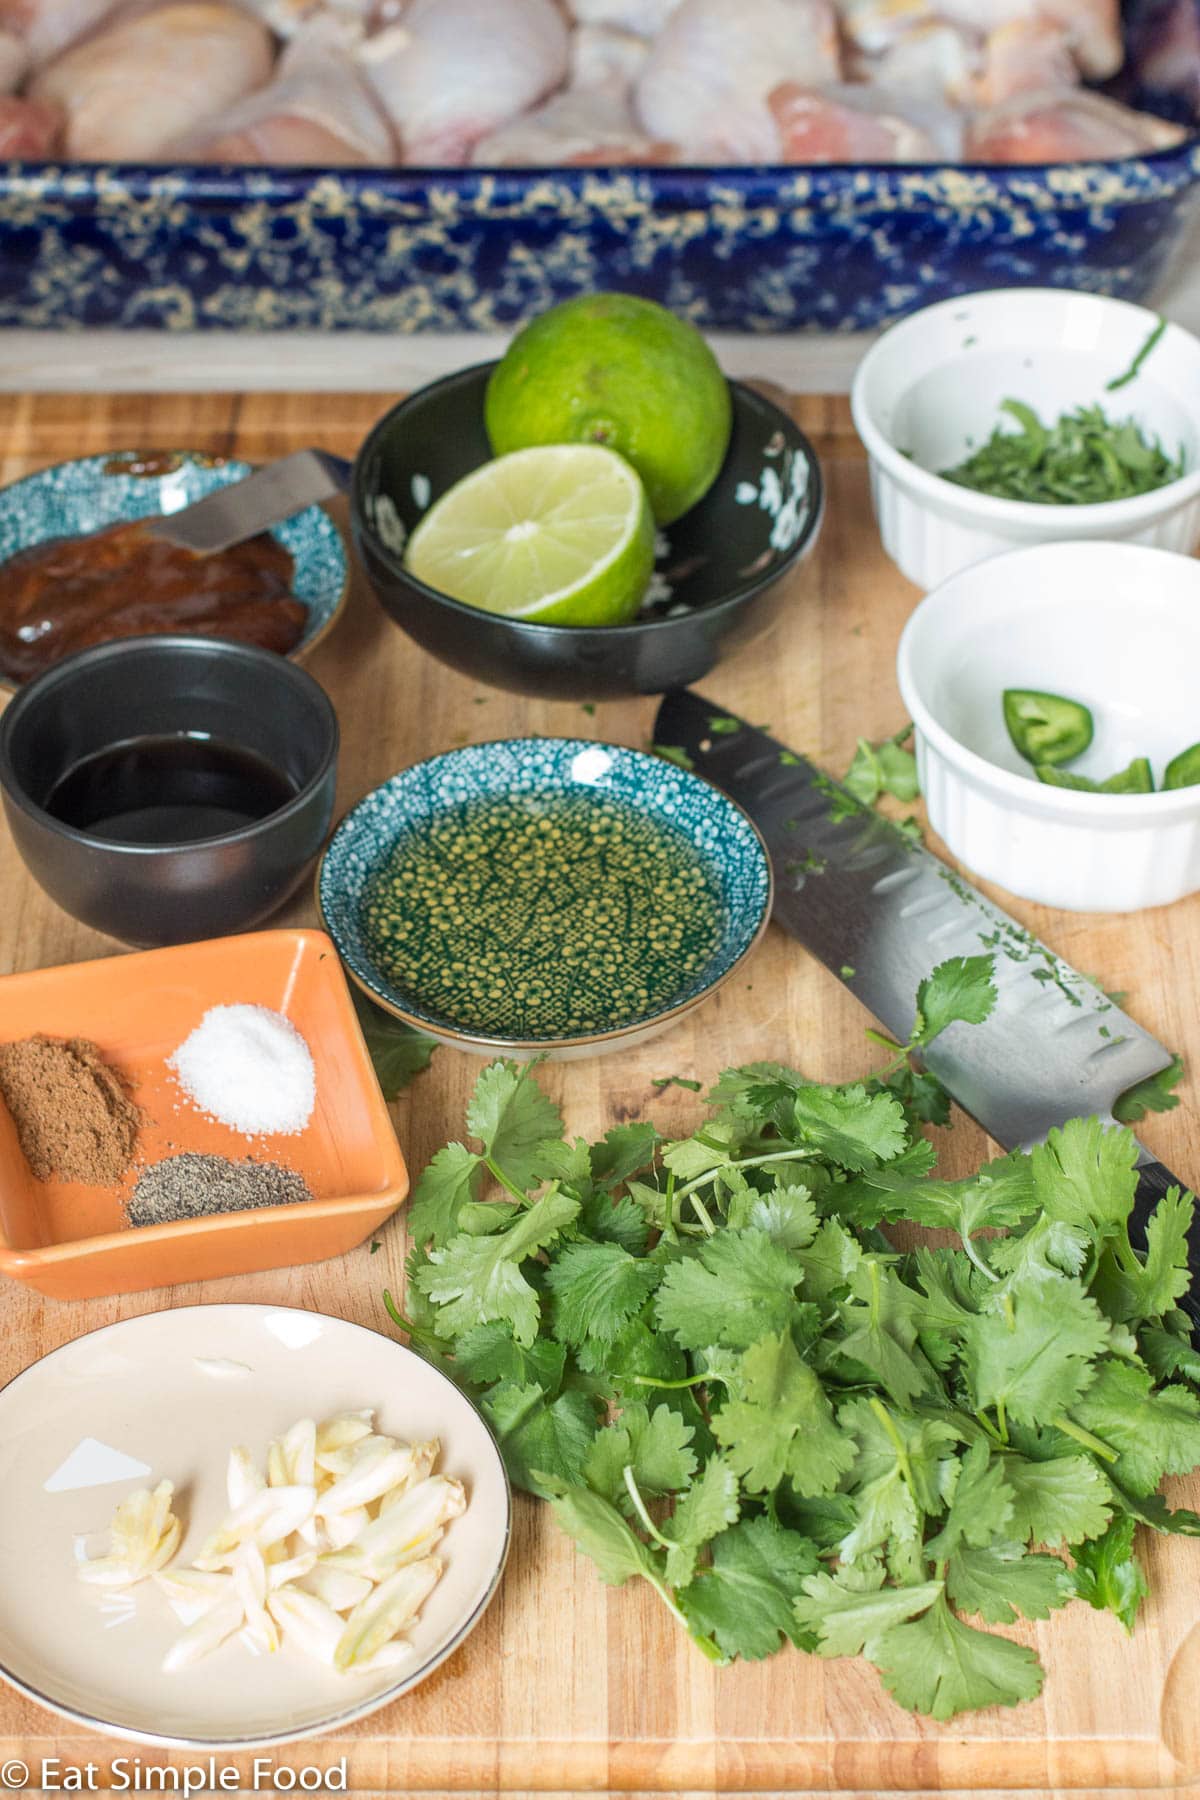 Raw ingredients on a wood cutting board: cilantro, garlic, spices, oil, lime cut in half, jalepeno, hoison sauce. Raw chicken in blue baking dish in background.